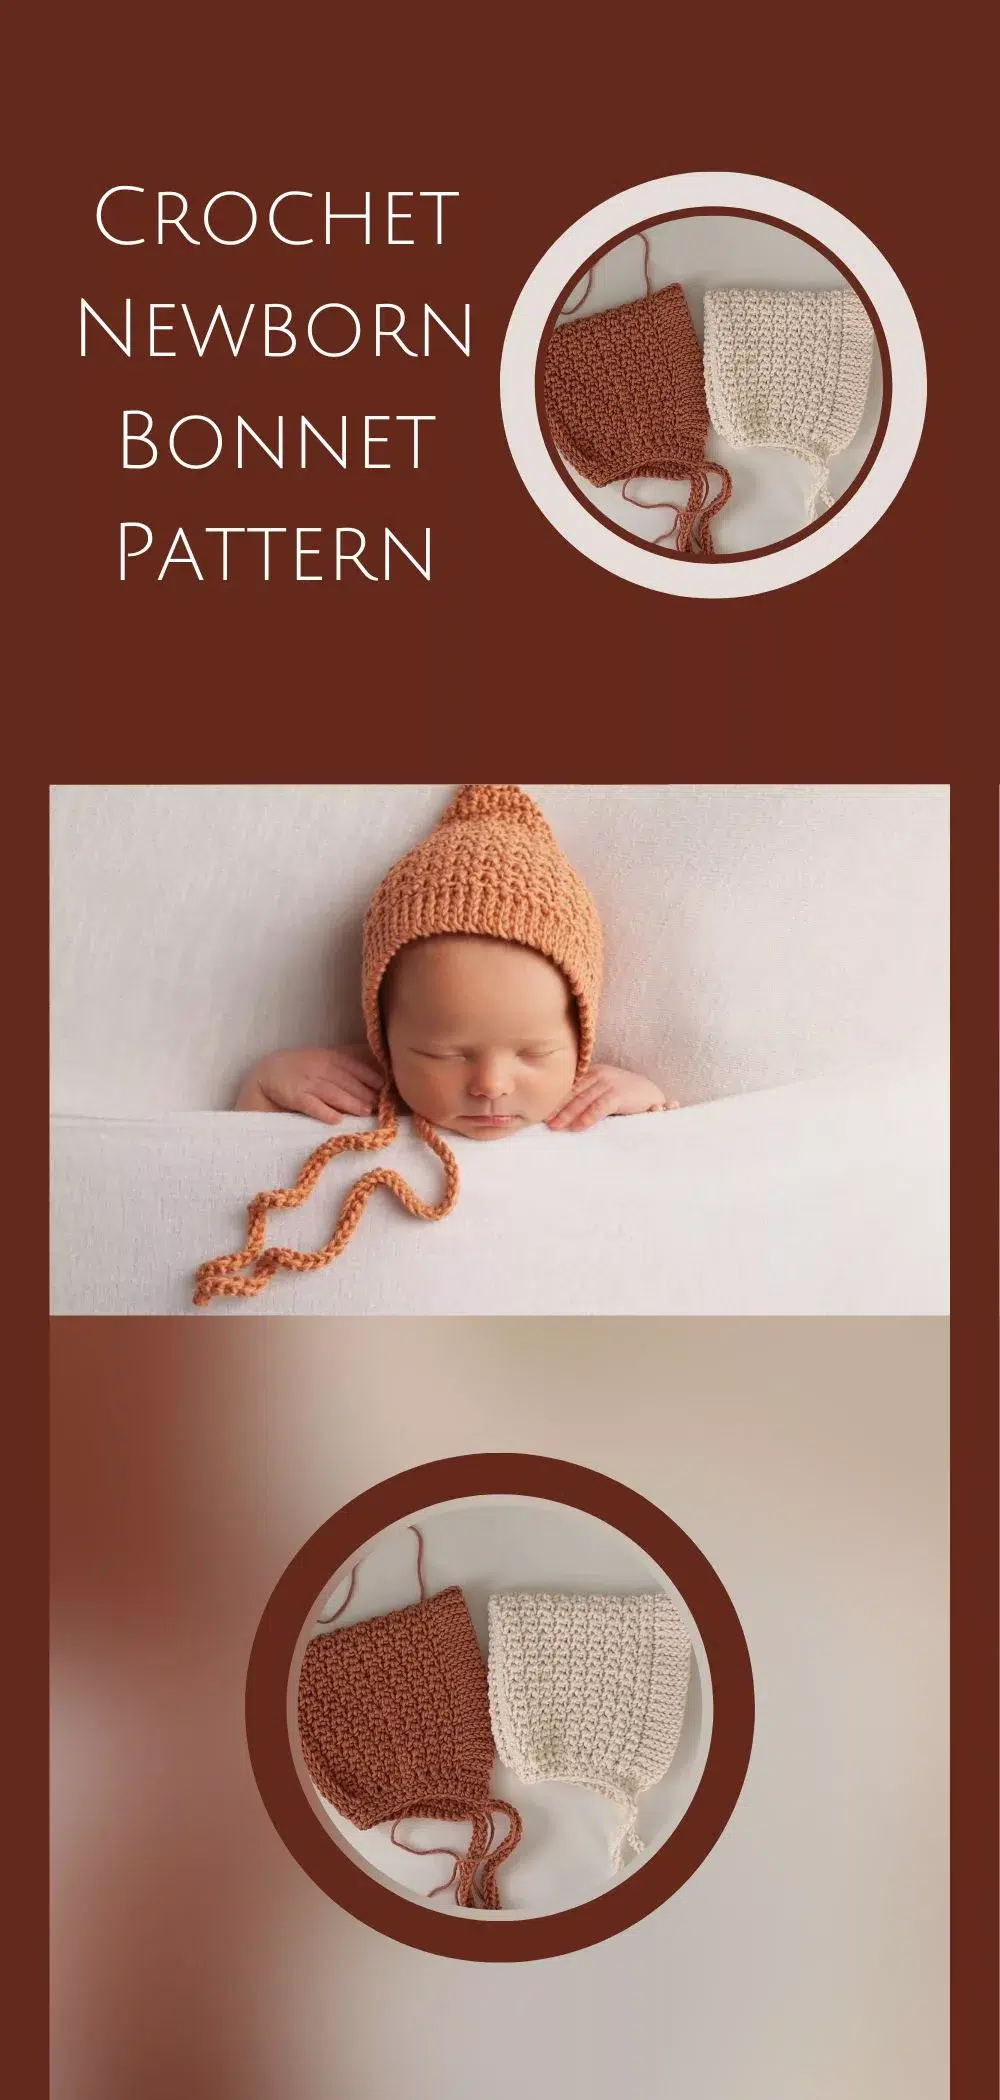 Easy Crochet Newborn Bonnet Pattern for beginners can be done by beginners. You will use simple crochet techniques in this project.